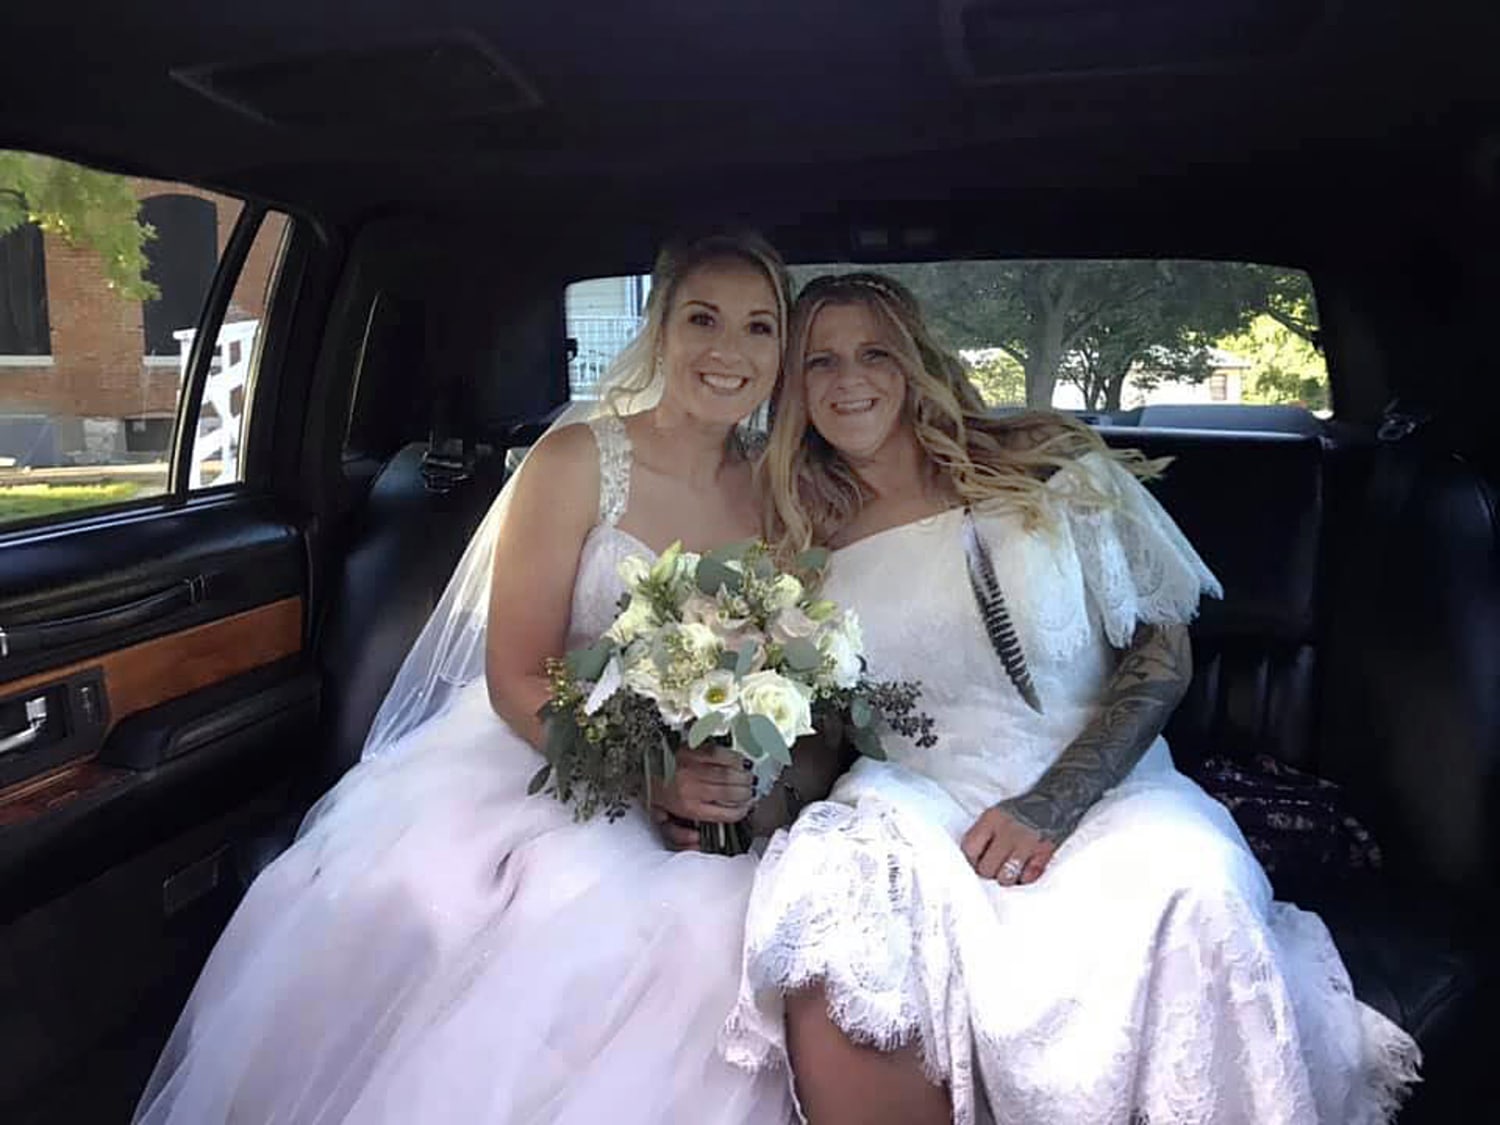 Lesbian couple initially denied wedding services finally ties the knot